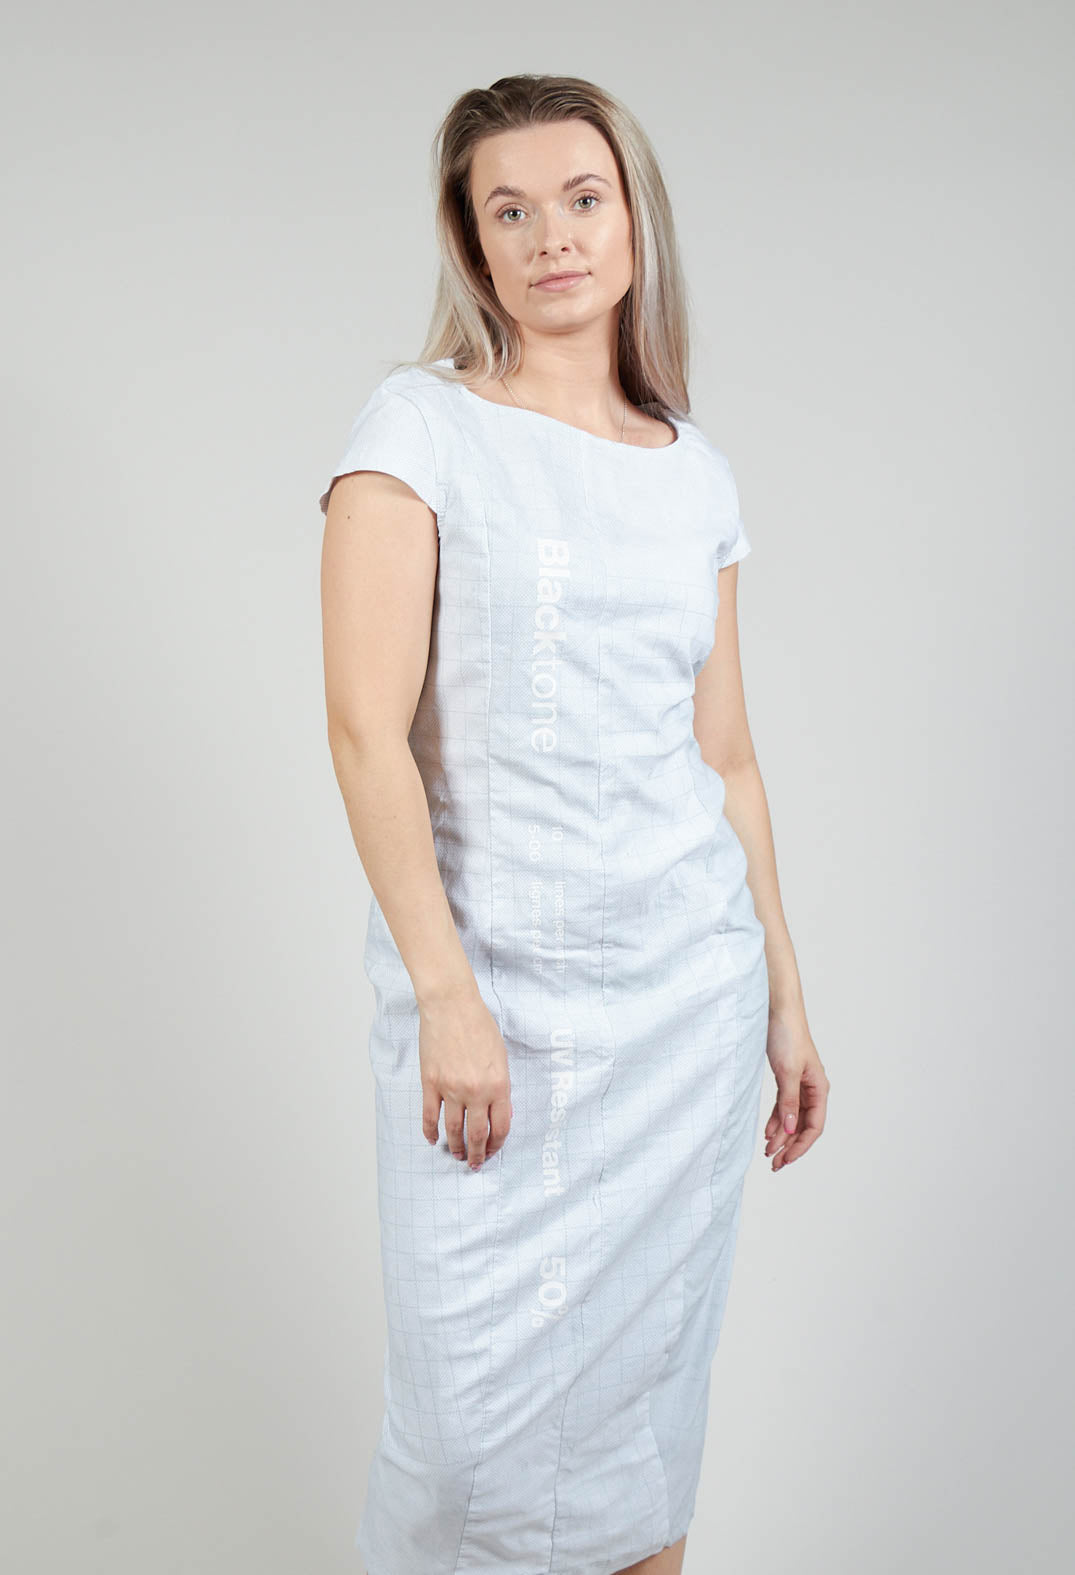 Capped Sleeve Slim Fit Dress in Placed Grey Print